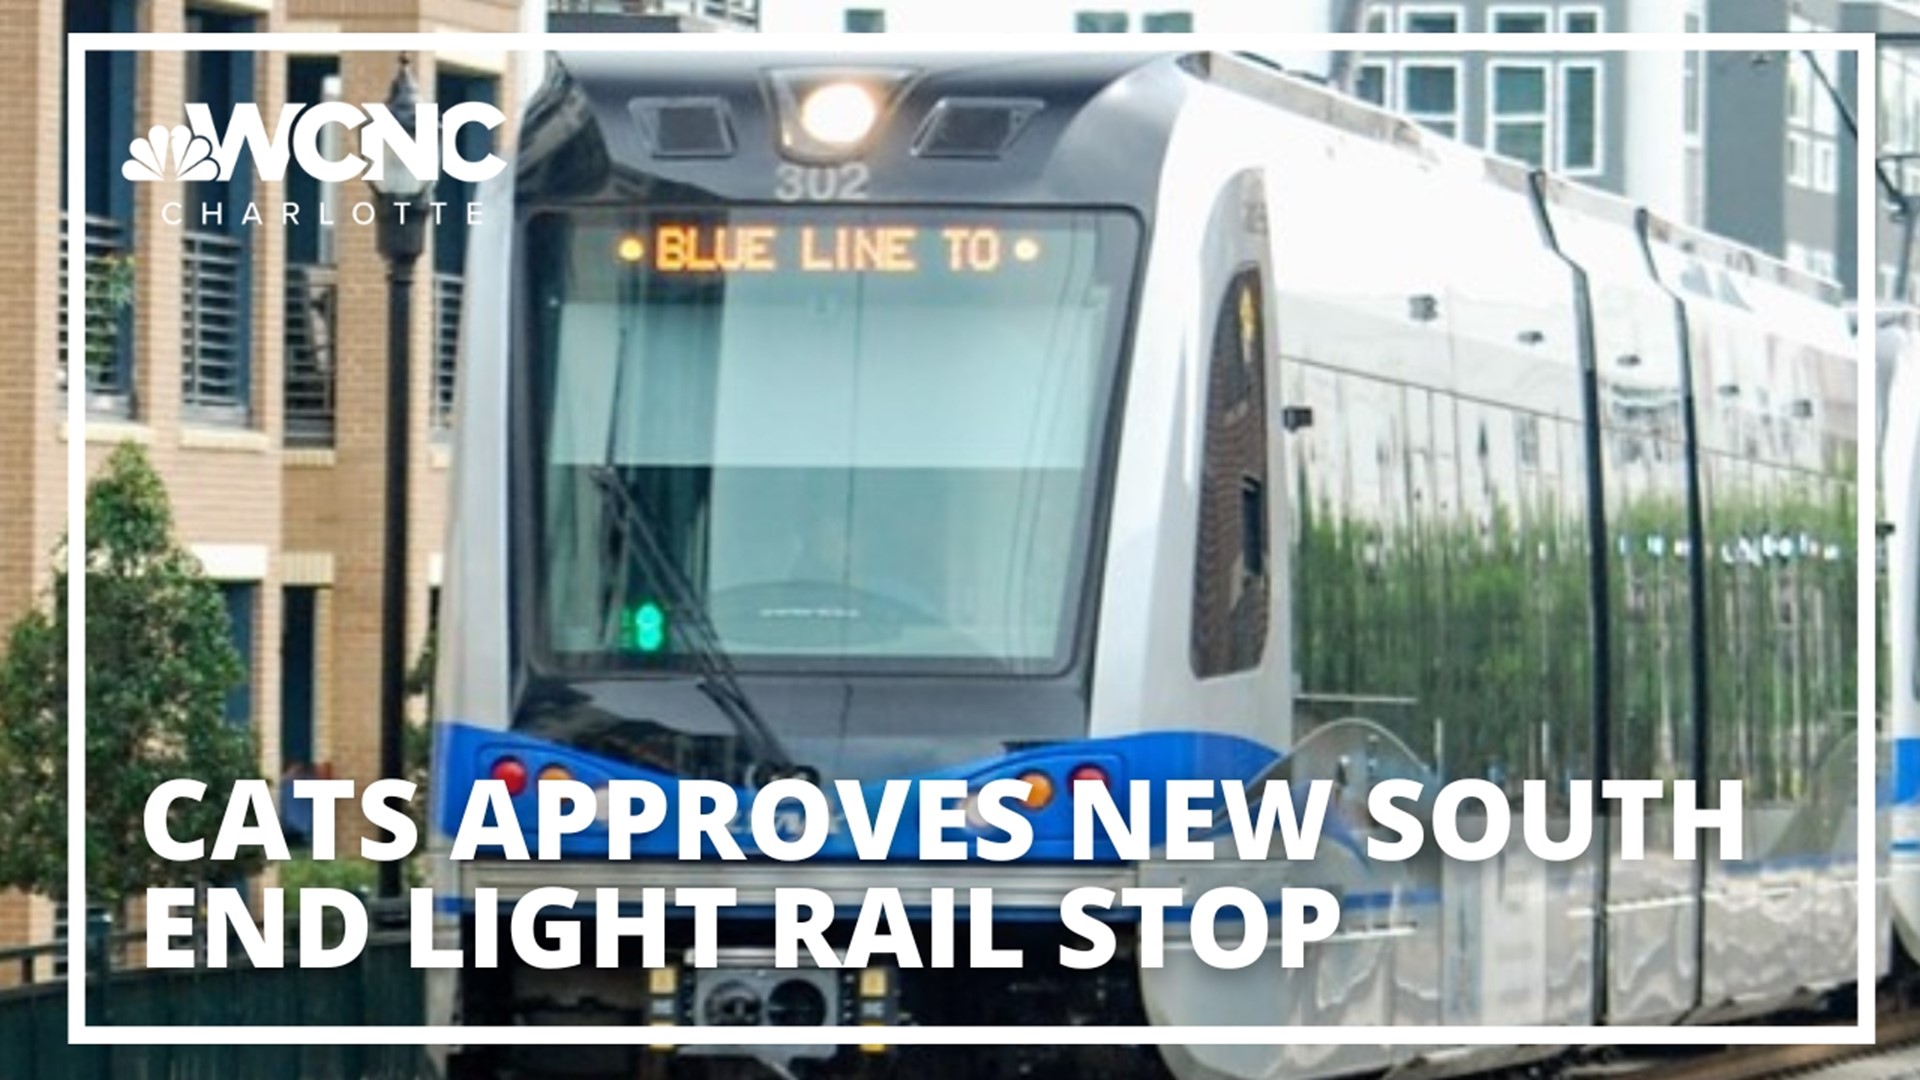 A vote on Wednesday night approved the addition of a light rail stop in South End on South Boulevard.